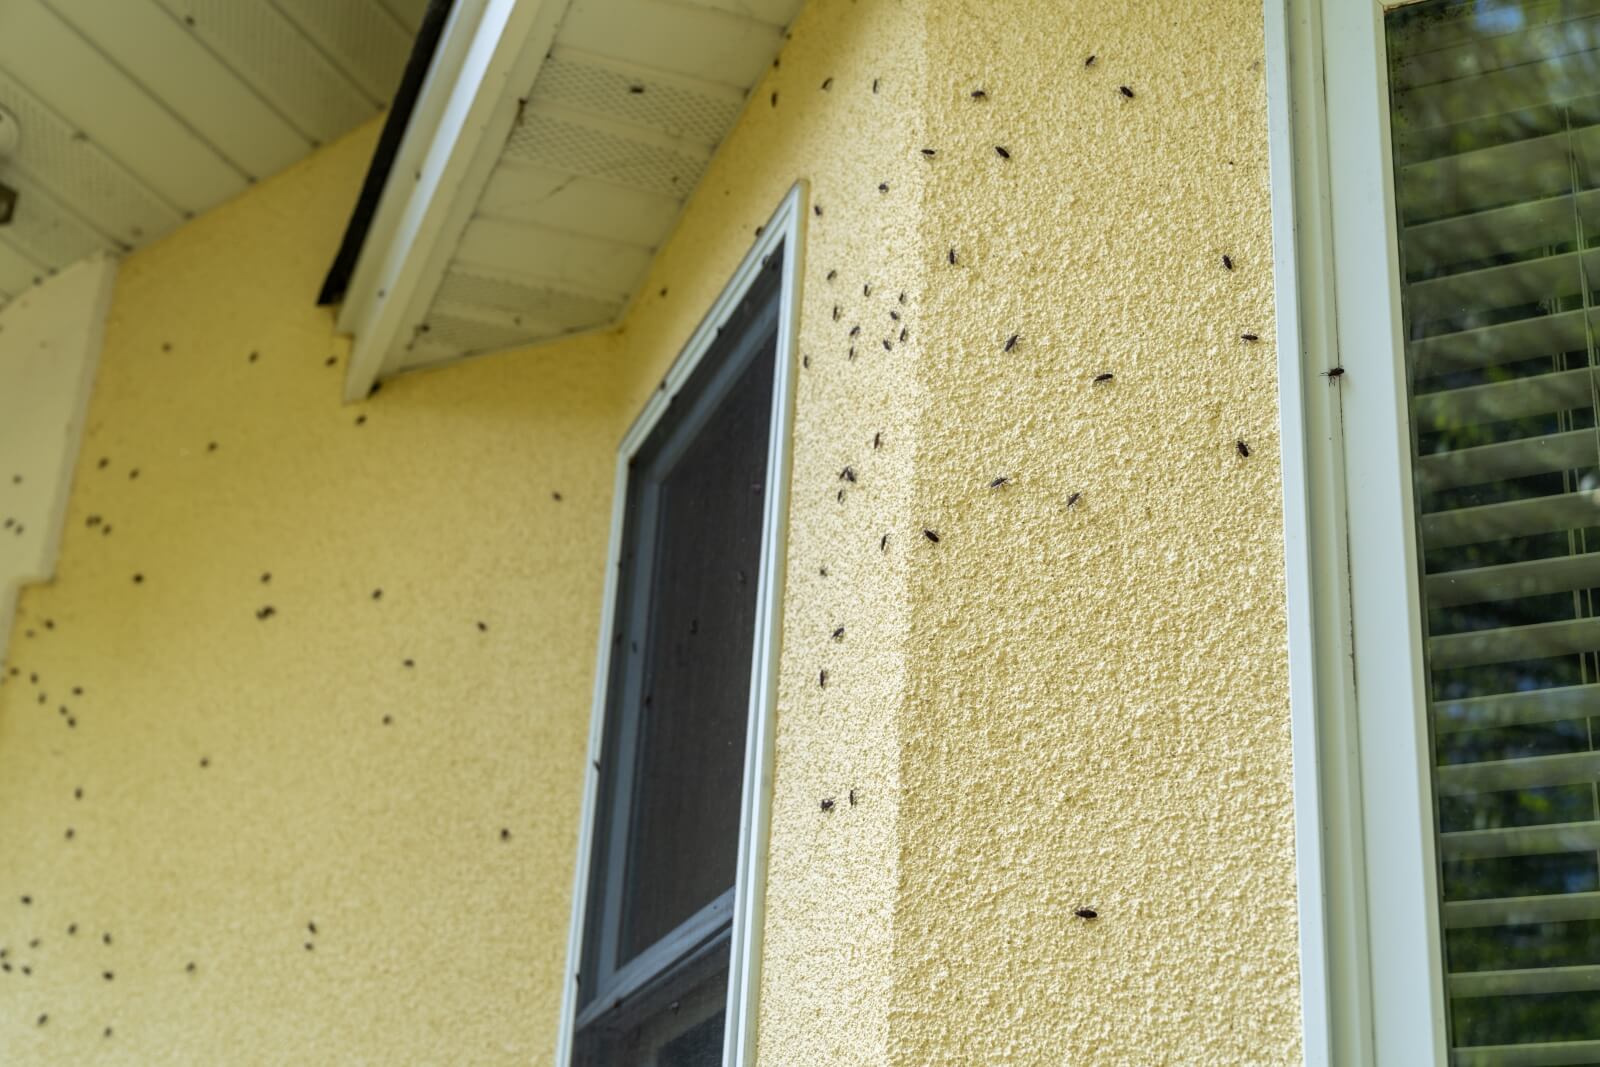 Pest infestation on the exterior of southern california home